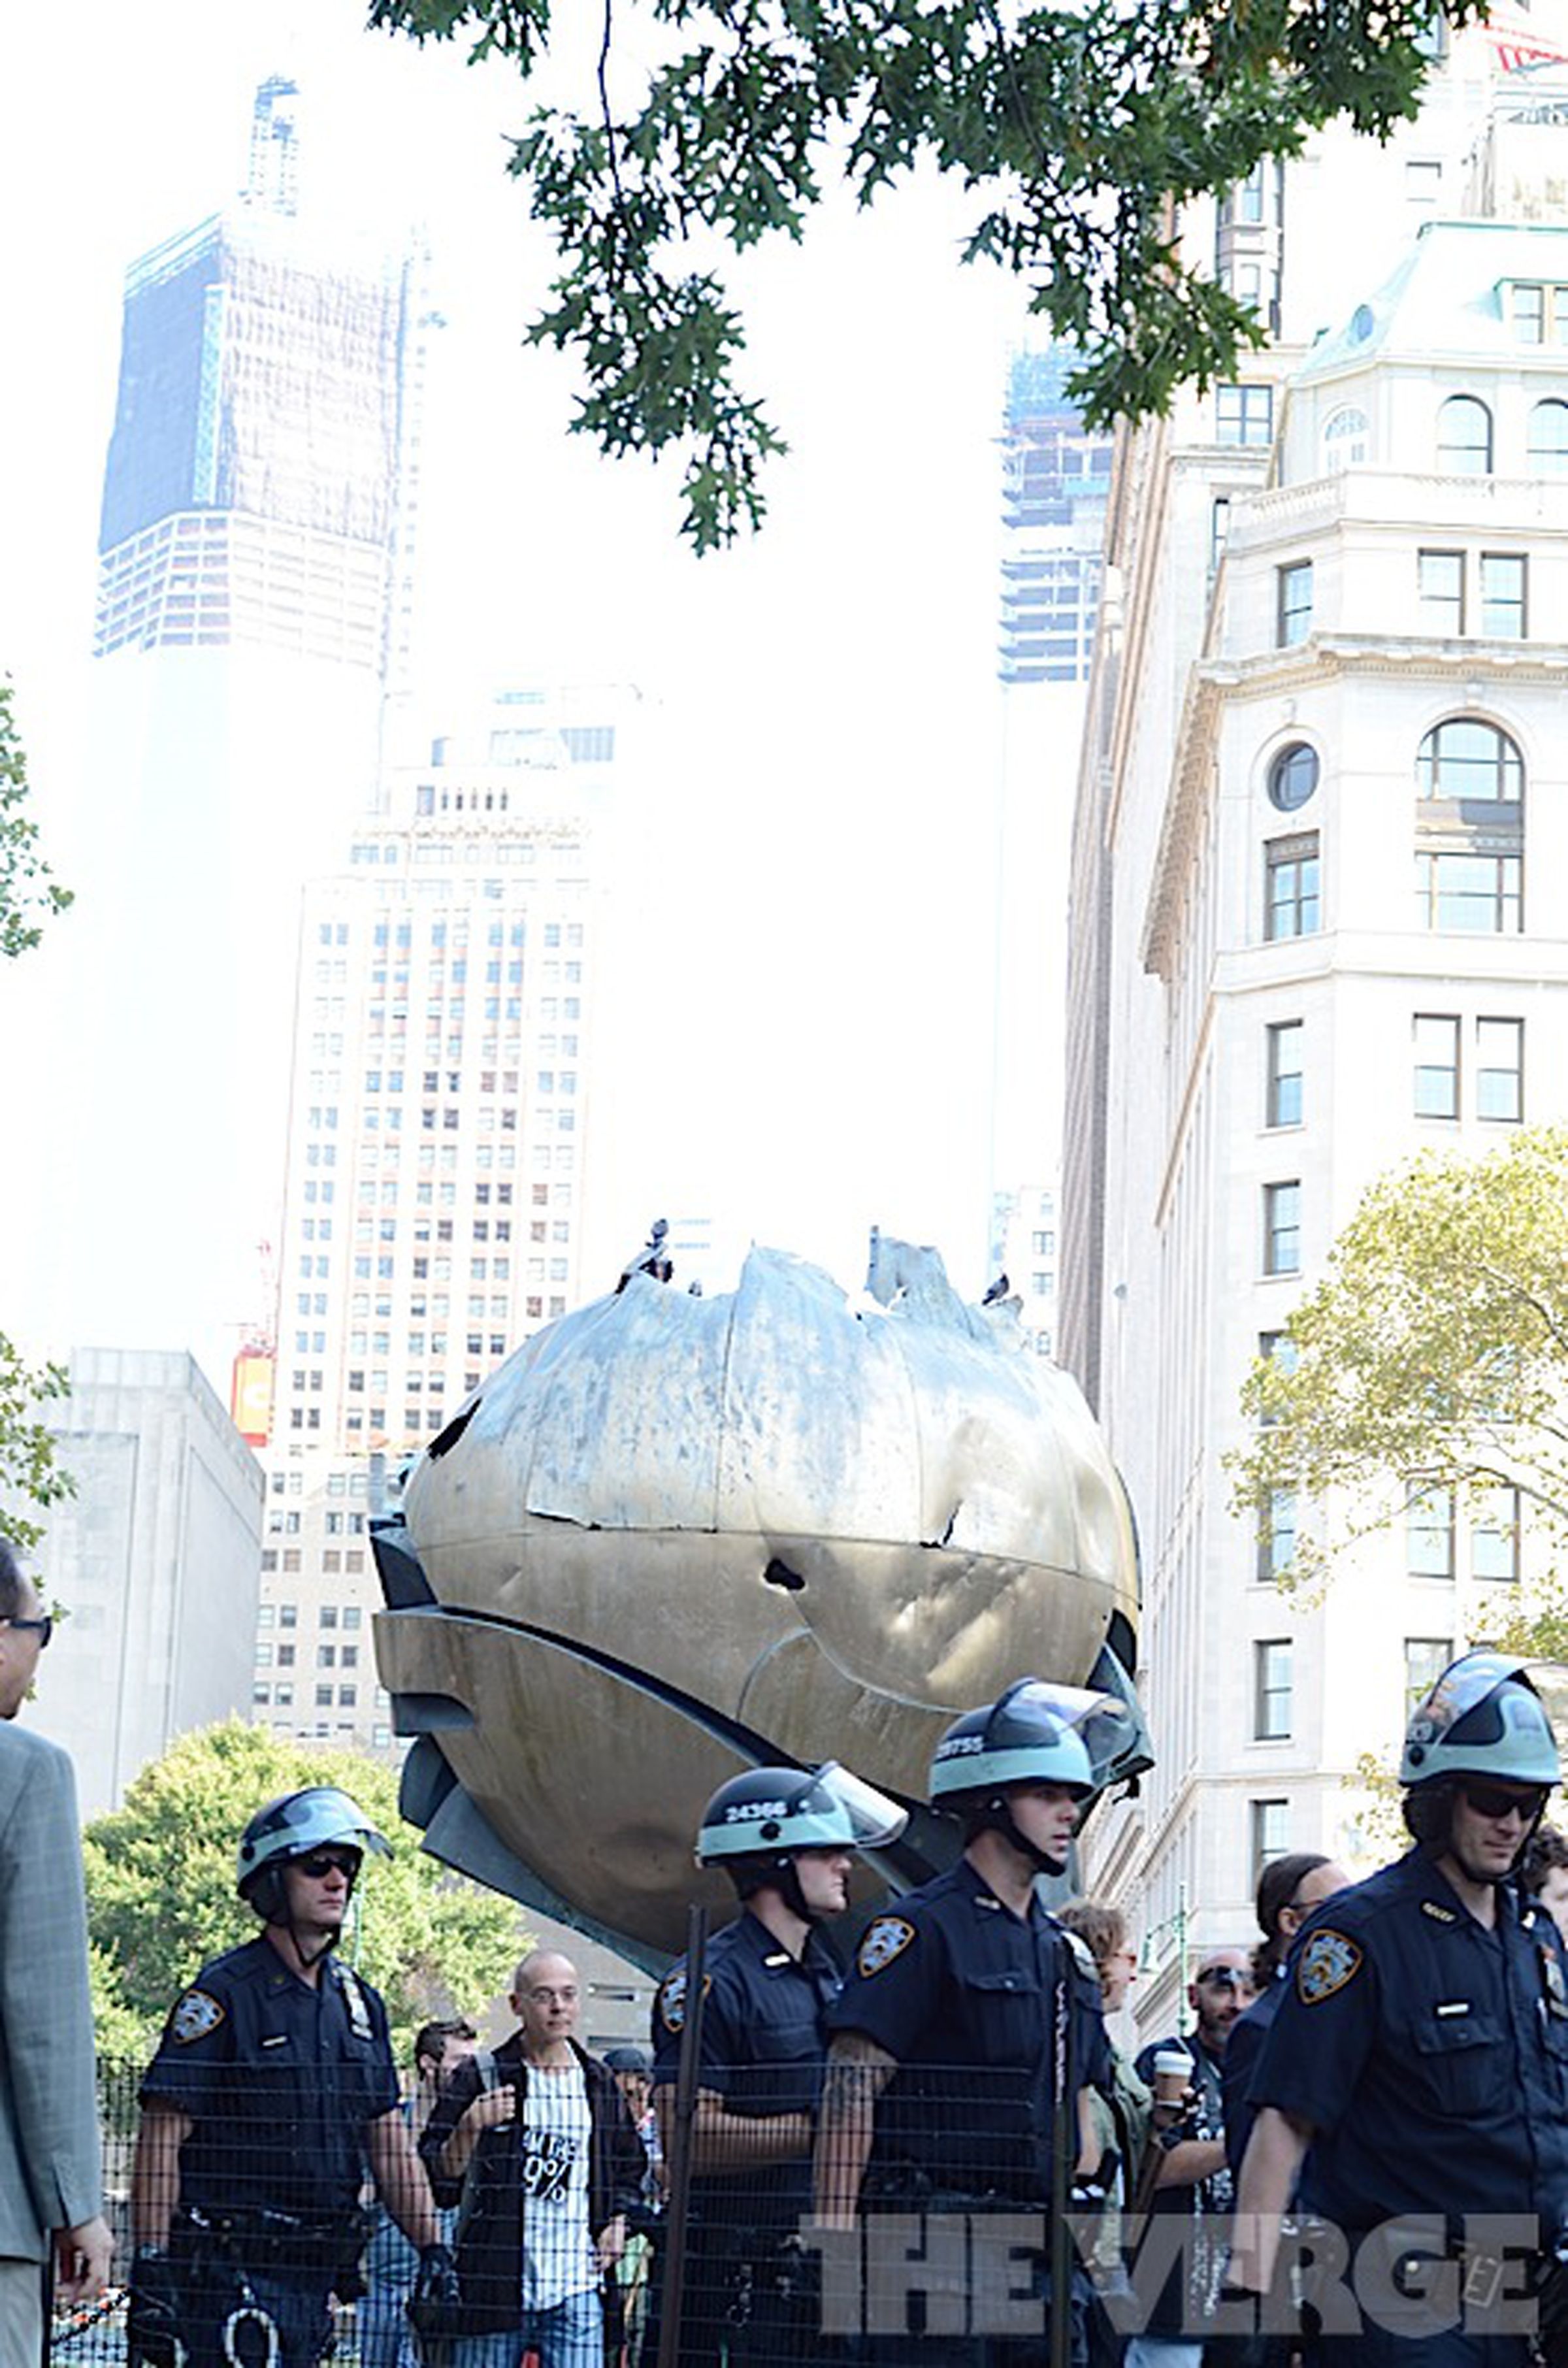 Occupy Wall Street's one year anniversary